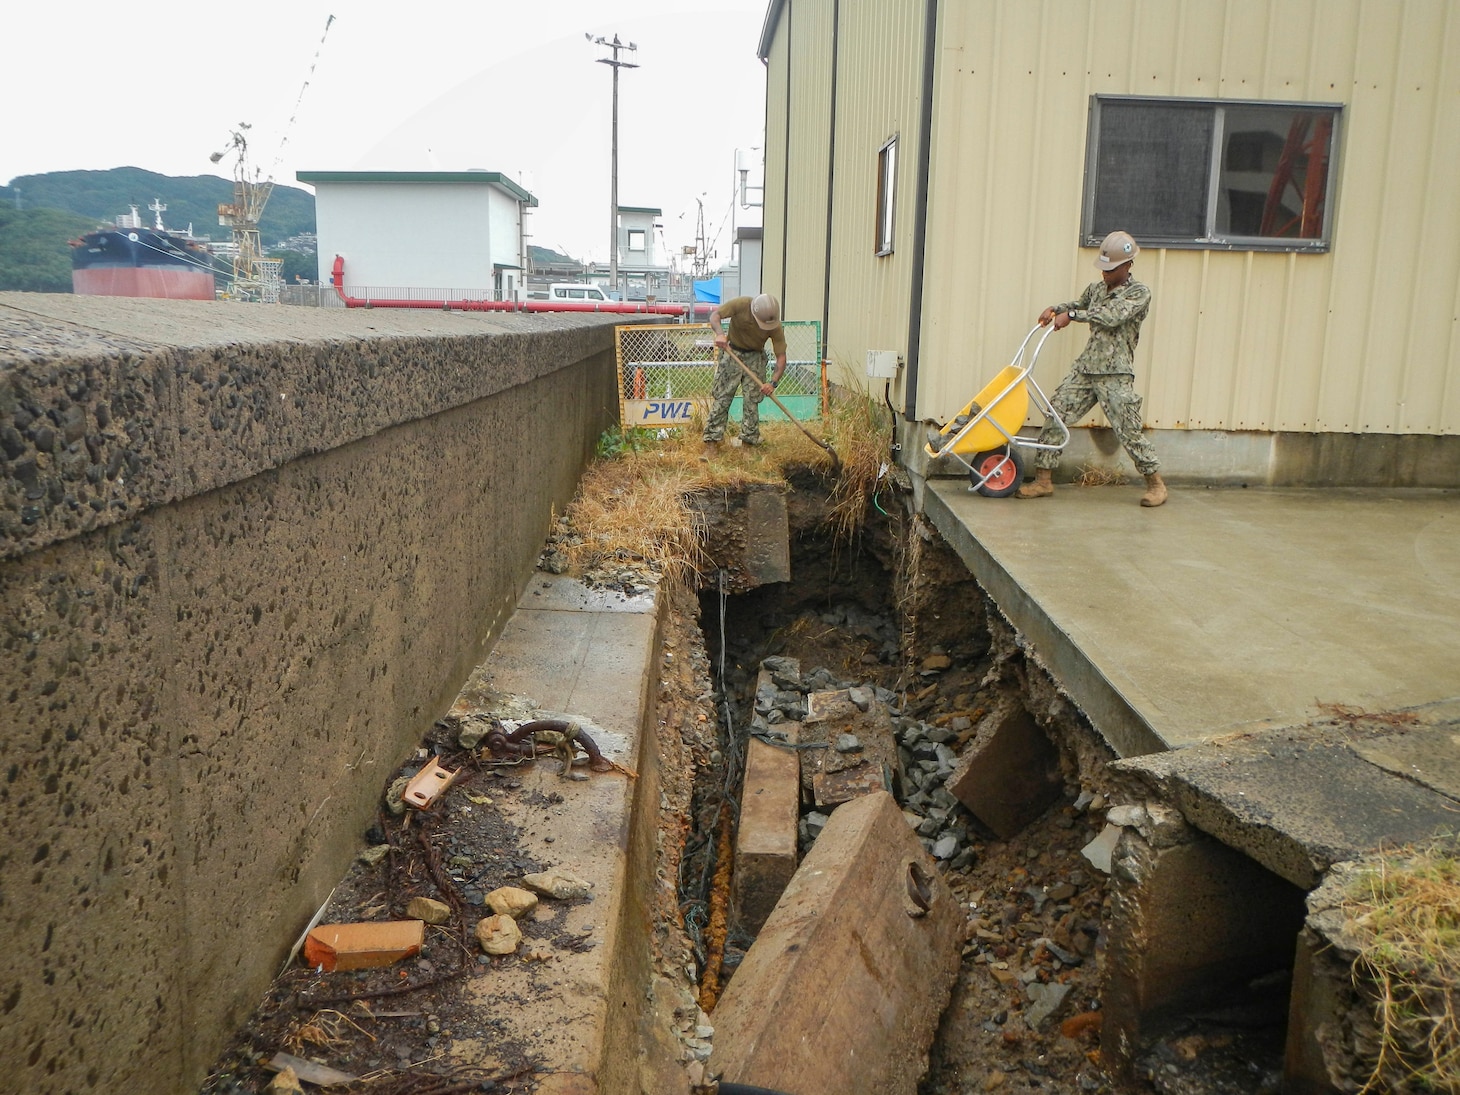 SASEBO, Japan (Oct. 28, 2019) Builder 3rd Class Lawrence Spears, from Houston, deployed with Naval Mobile Construction Battalion (NMCB) 5’s Detail Sasebo, places riprap to repair critical infrastructure damage to the seawall on Commander Fleet Activities Sasebo to further improve the base’s military readiness and capability.  NMCB-5 is deployed across the Indo-Pacific region conducting high-quality construction to support U.S. and partner nations to strengthen partnerships, deter aggression, and enable expeditionary logistics and naval power projection.